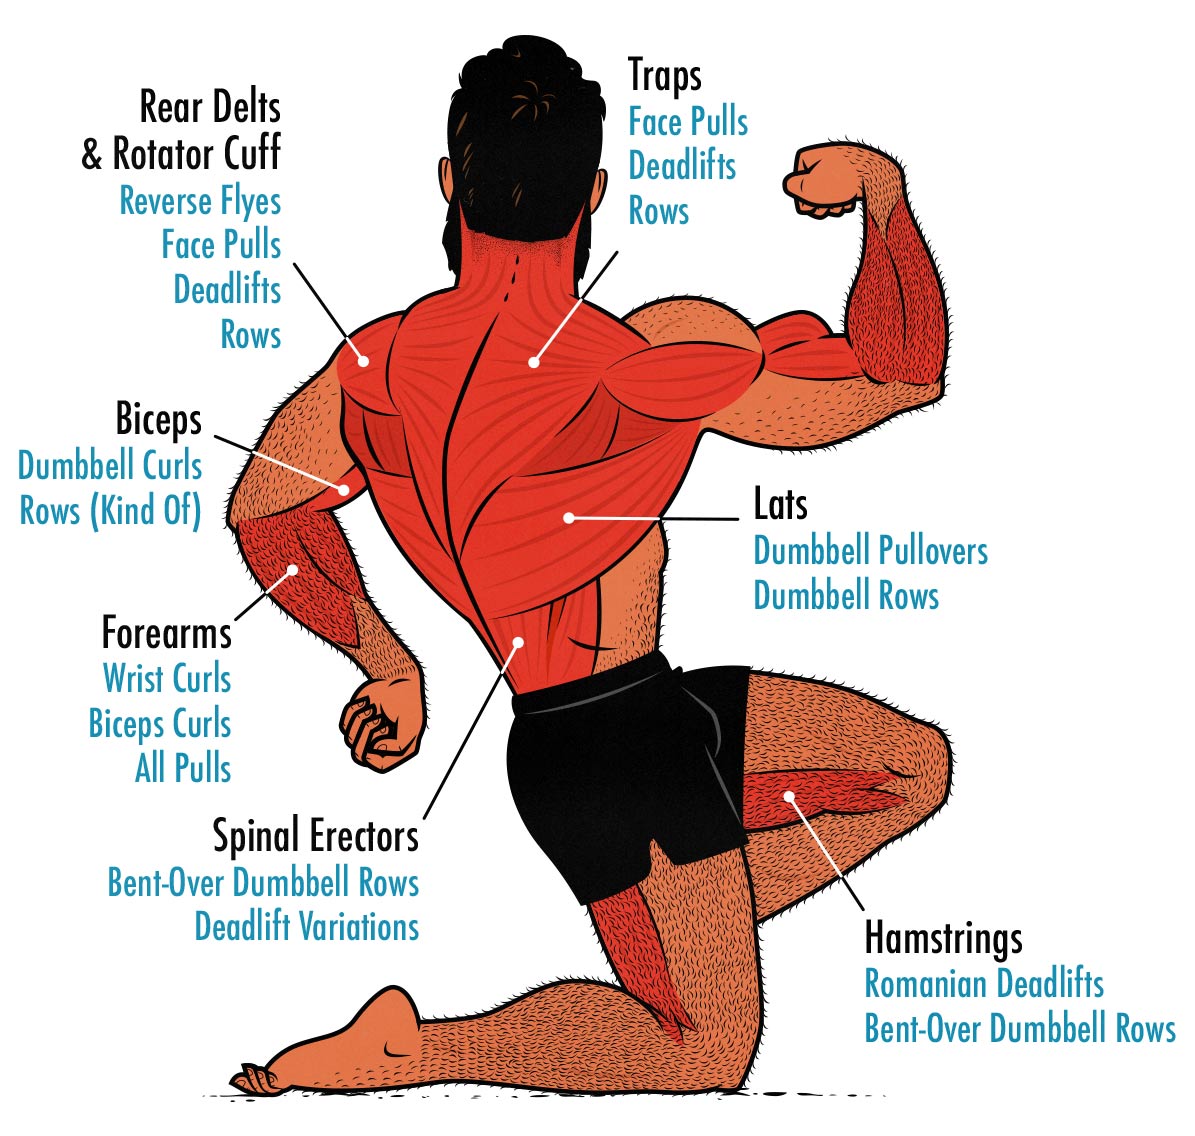 Diagram showing which back muscles are worked by which back exercises.